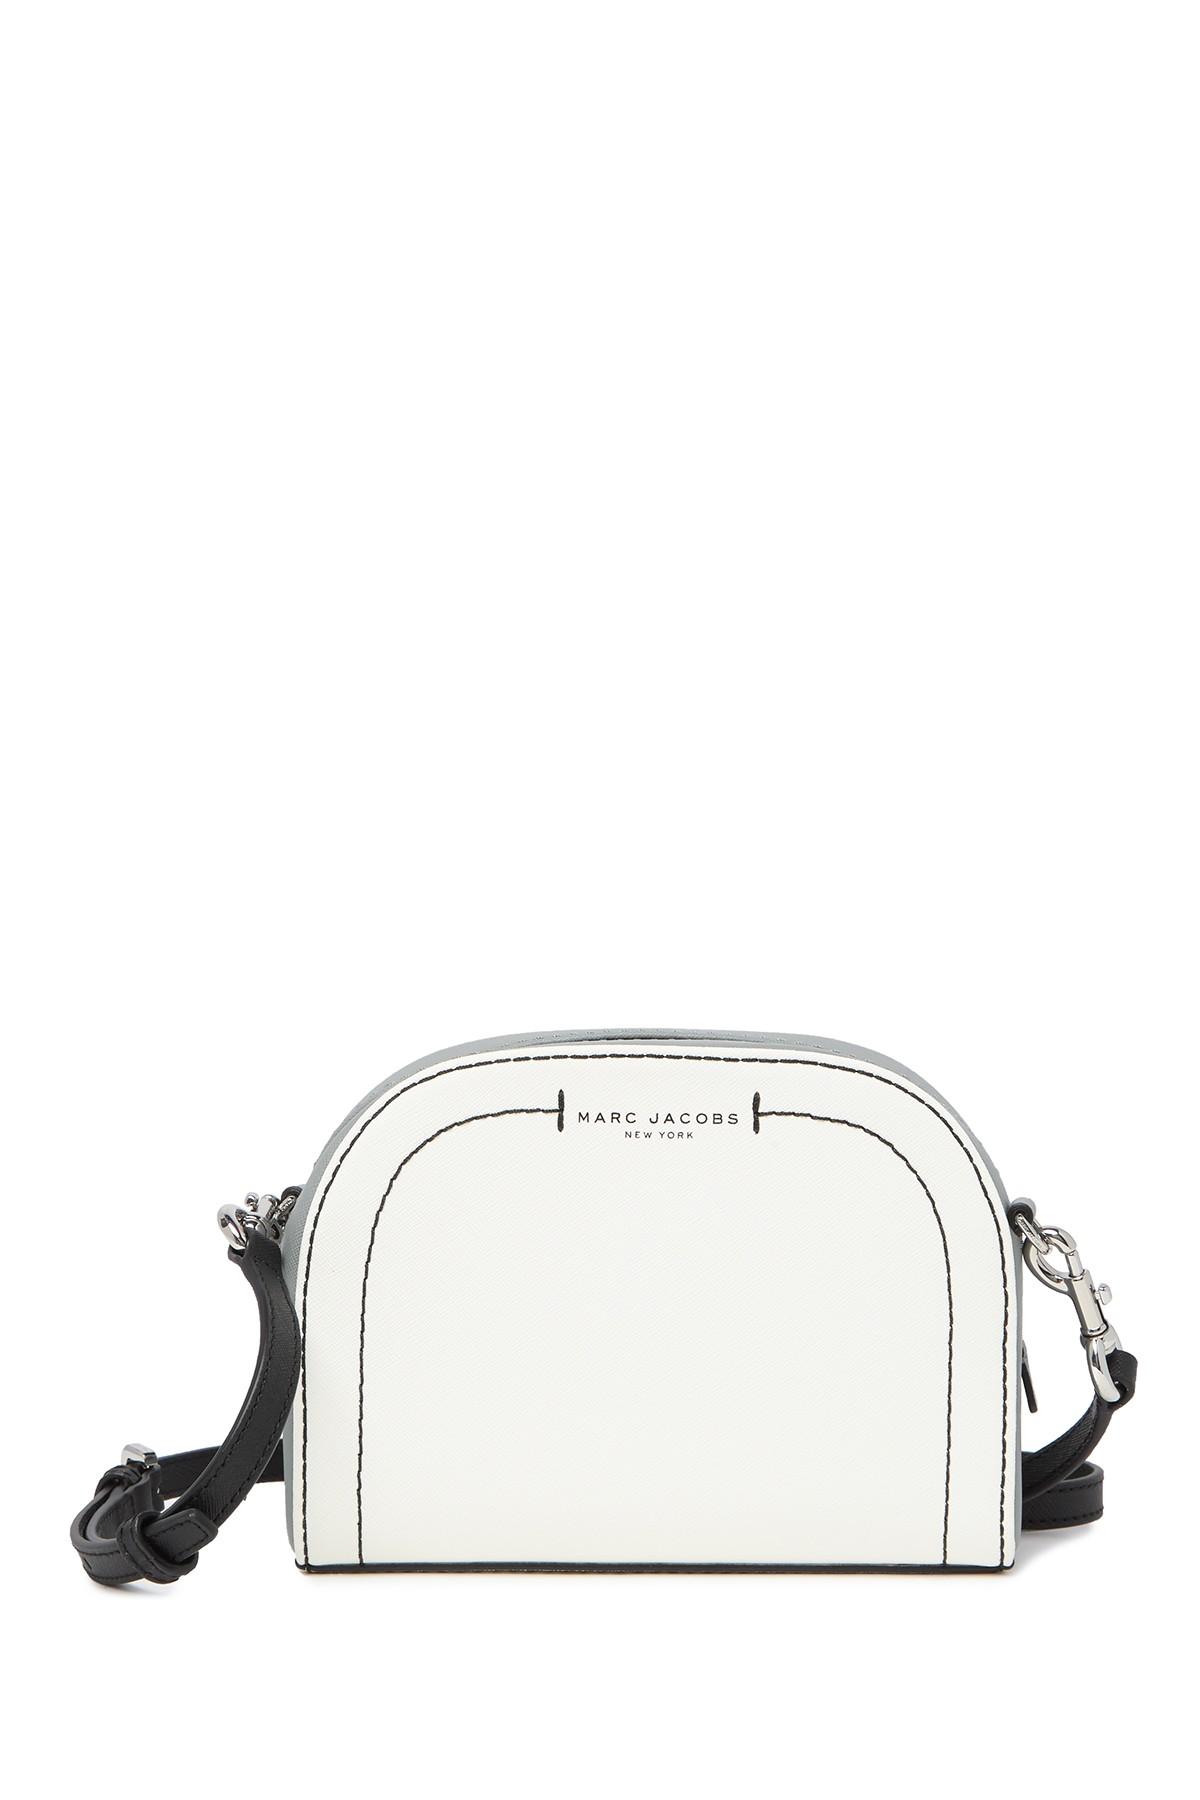 Marc Jacobs Playback Colorblocked Leather Crossbody Bag in White - Lyst